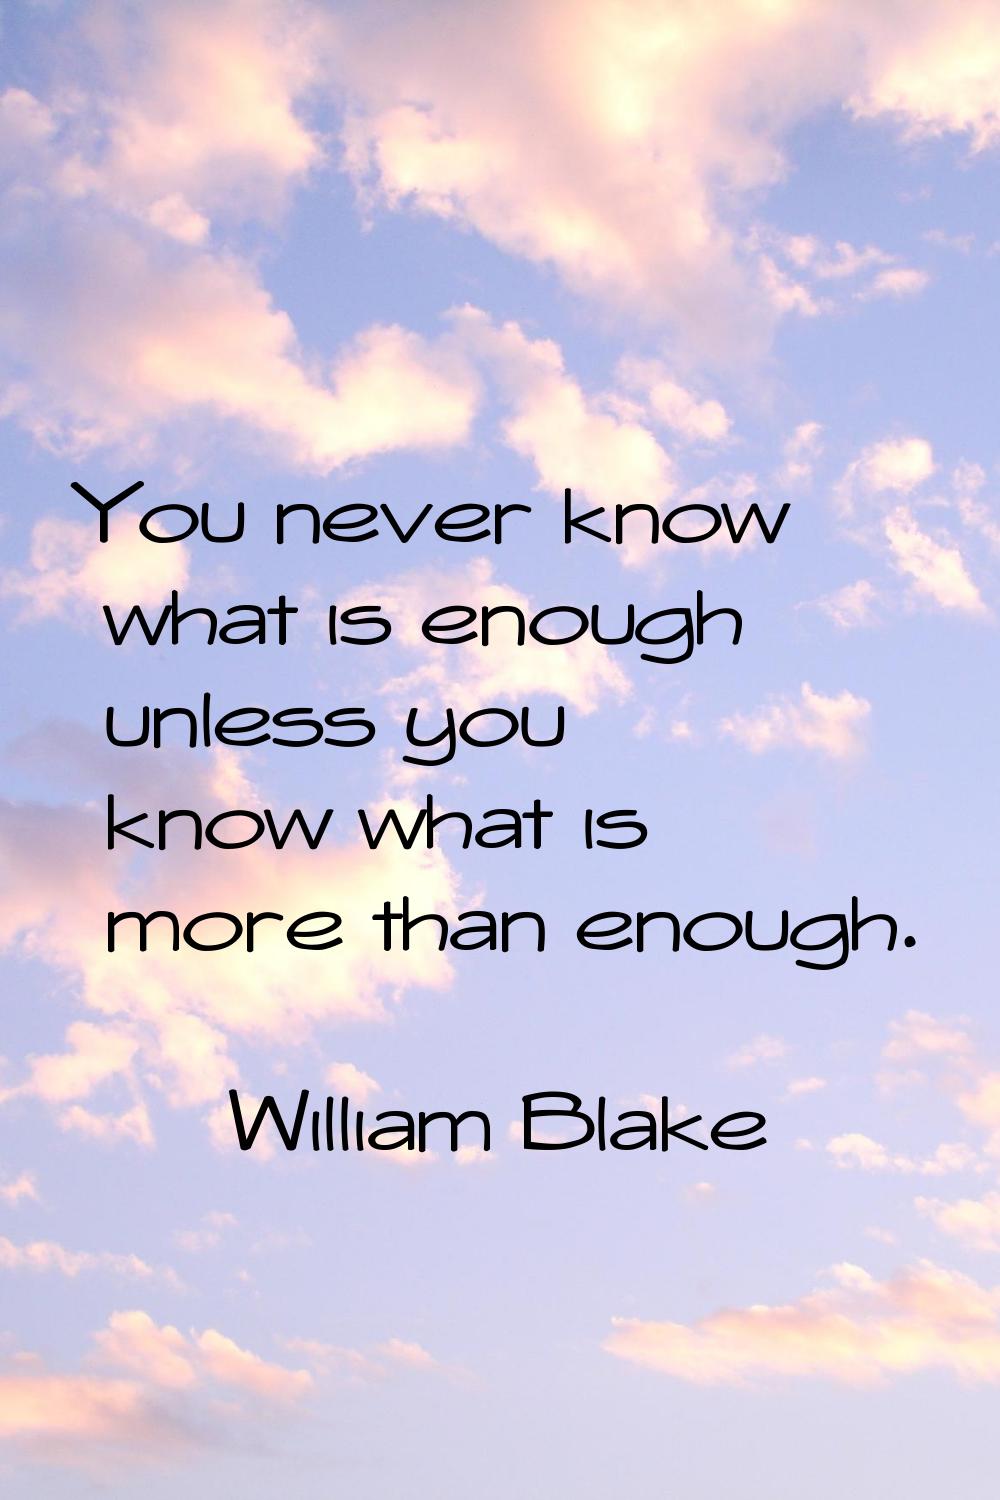 You never know what is enough unless you know what is more than enough.